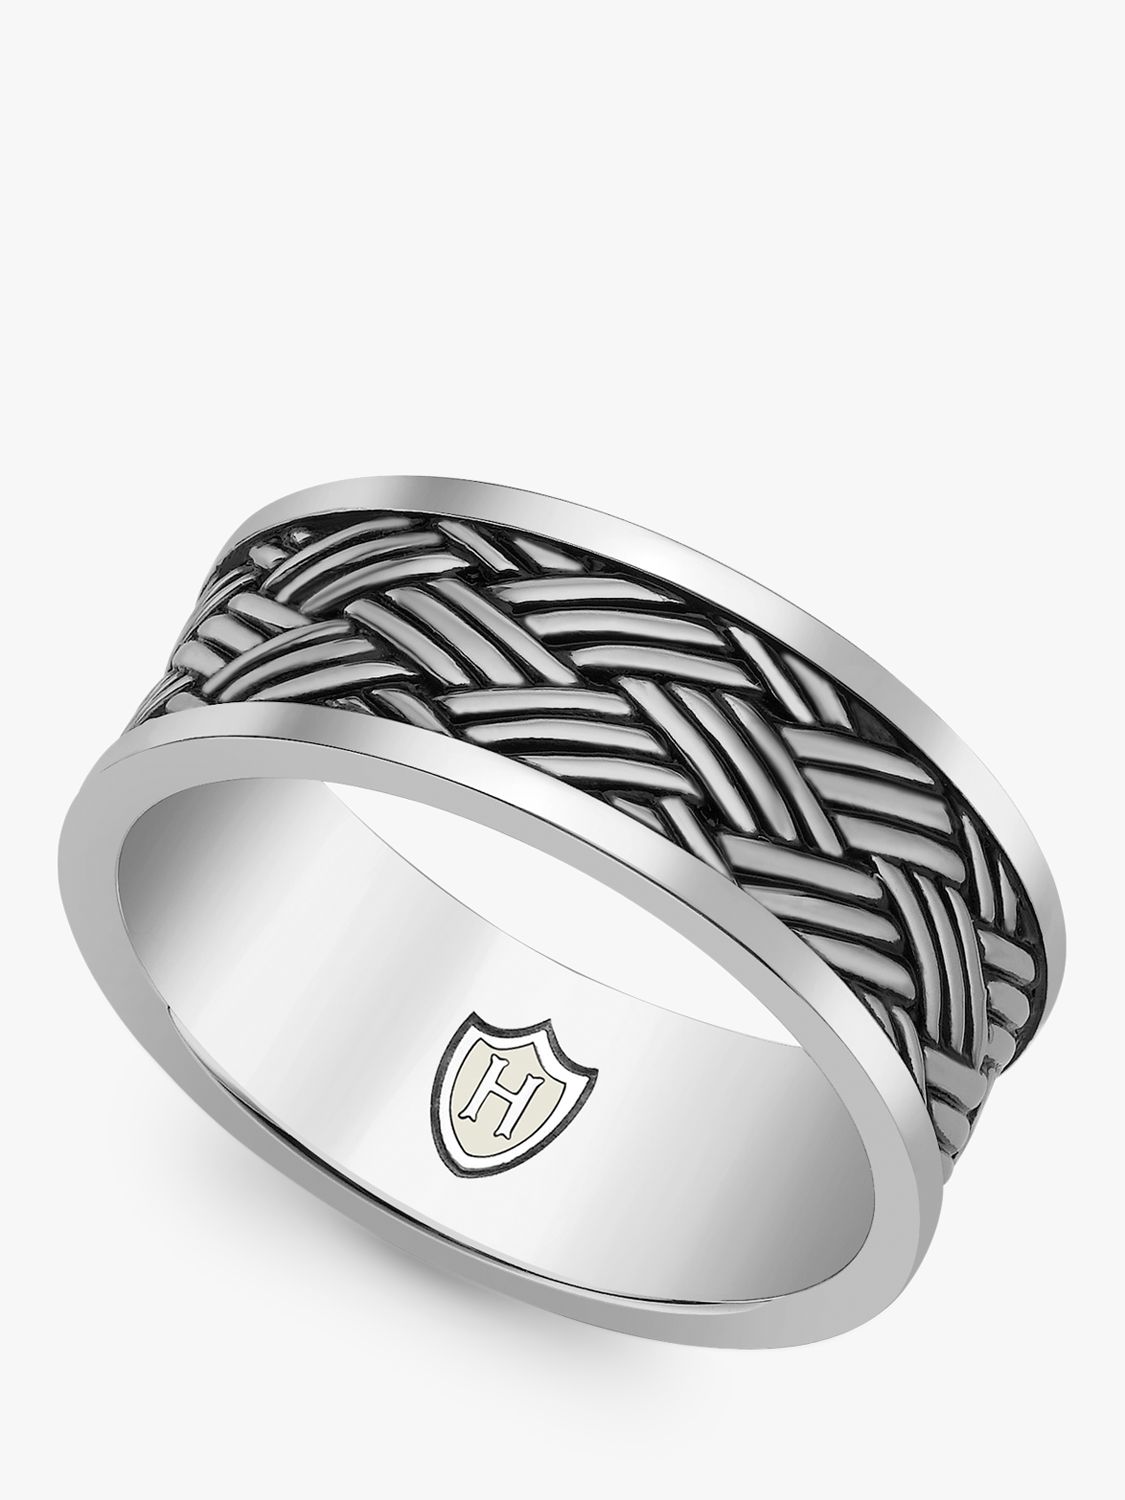 Buy Hoxton London Men's Bamboo Oxidised Ring, Silver Online at johnlewis.com